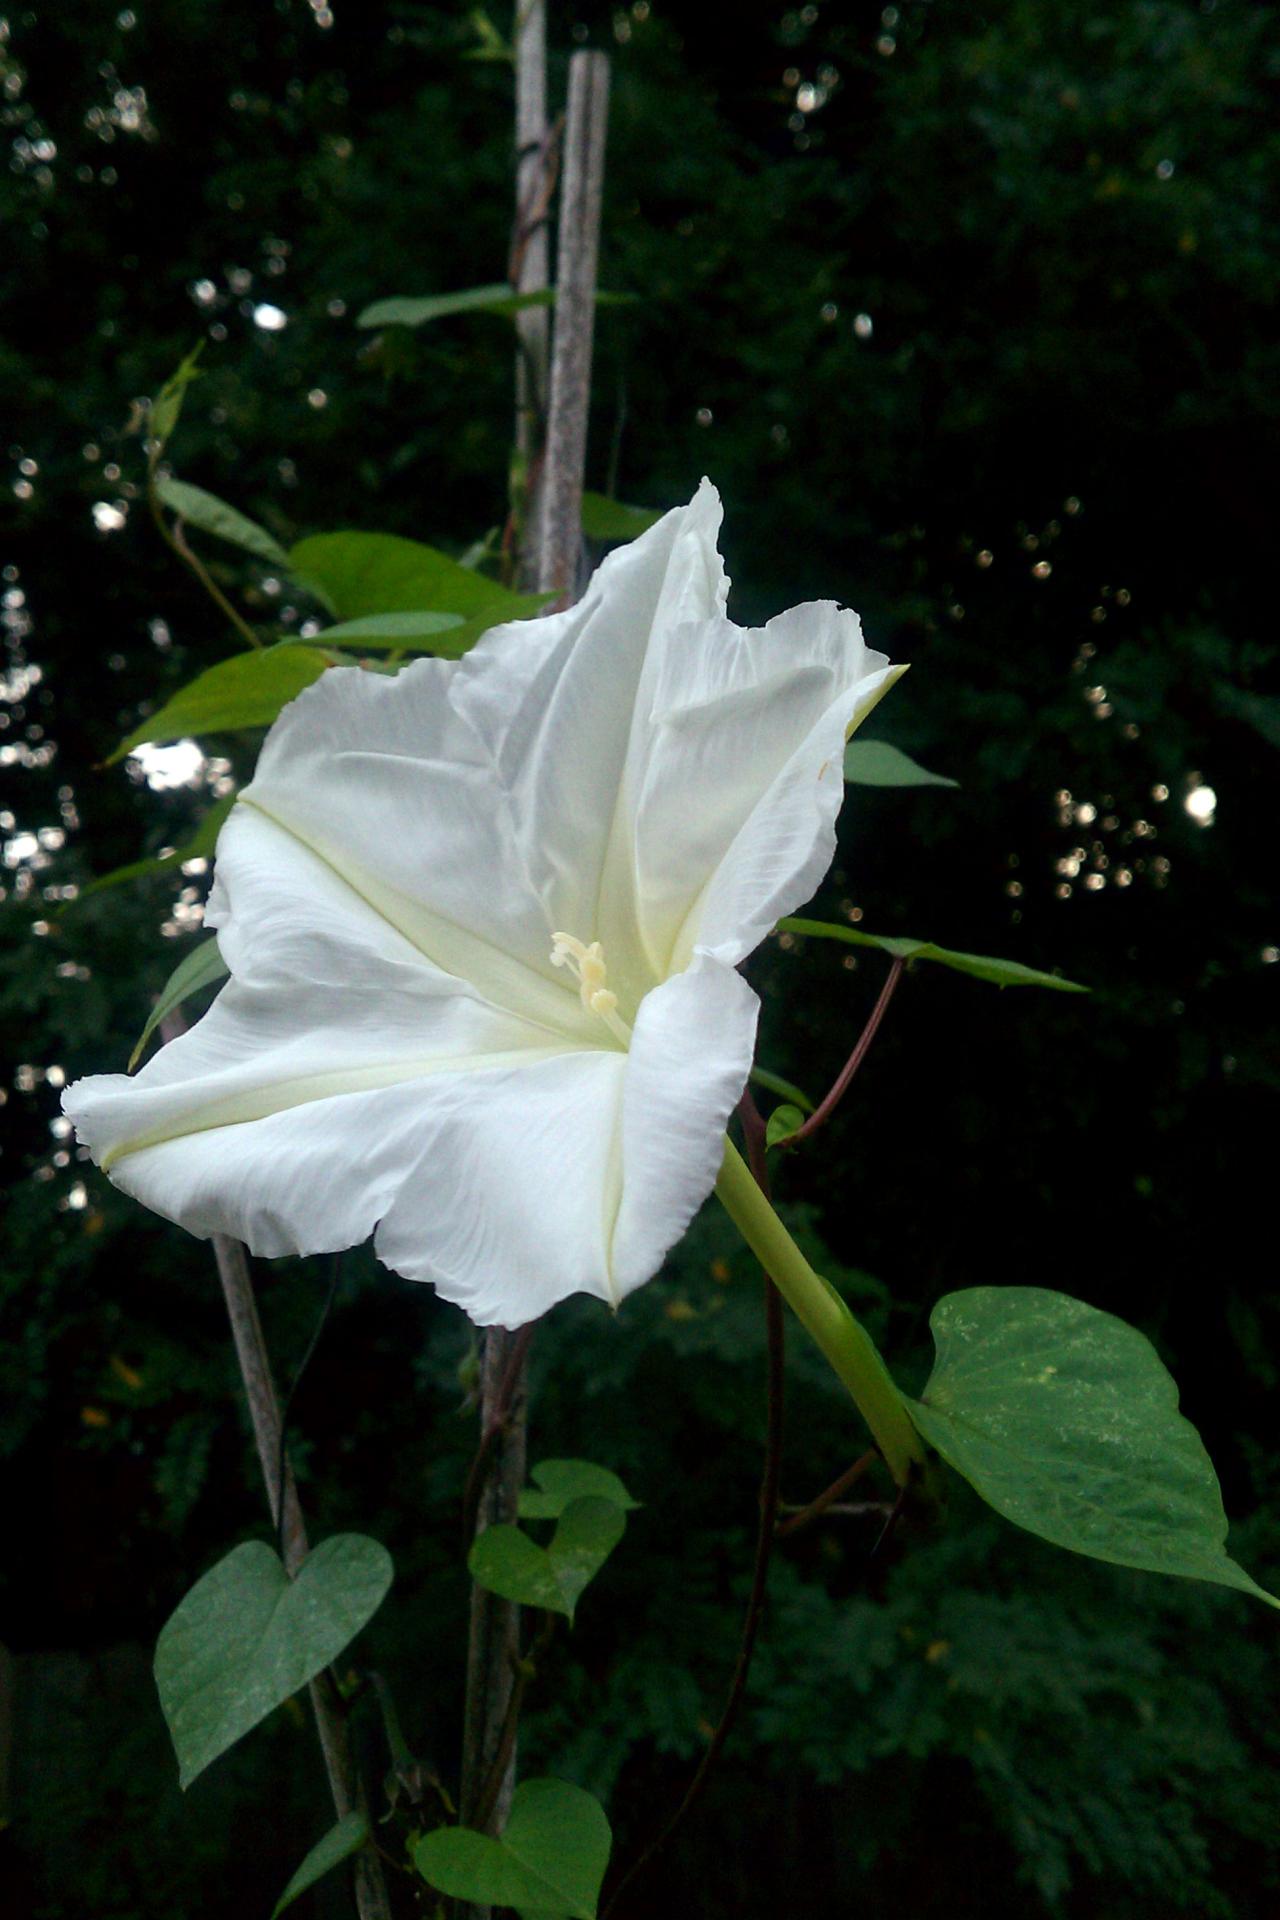 How To Grow And Care For Moonflowers Hgtv,How Long Should My Curtains Be For 10 Foot Ceilings